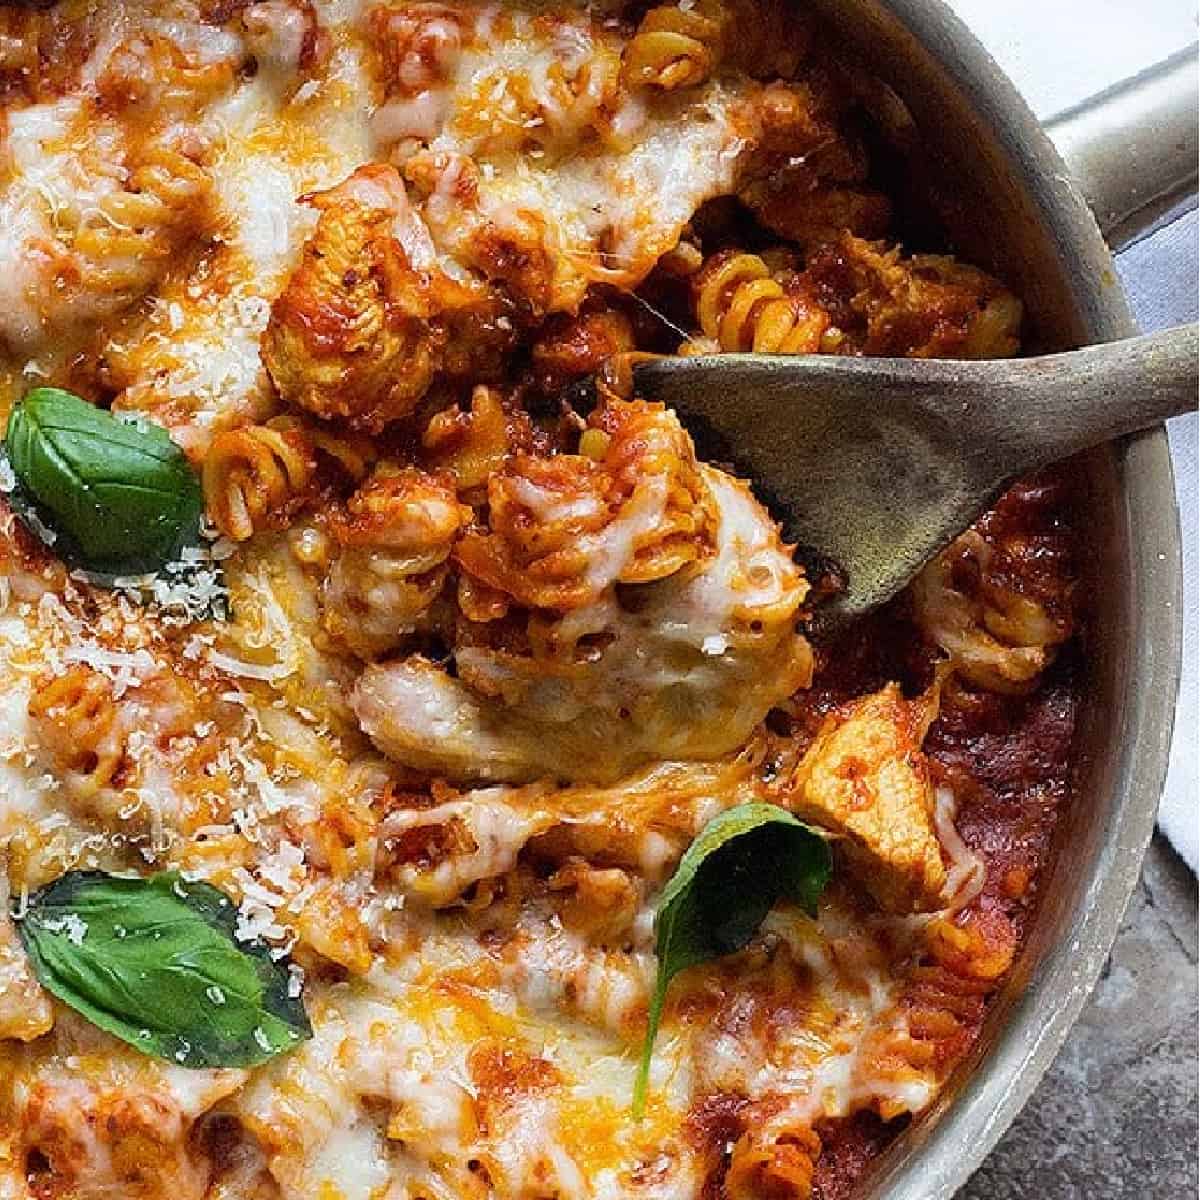 A healthier version of an all-time favorite, this One Pan Chicken Parmesan Pasta is great for weeknight dinners and is ready in less than 40 minutes!
